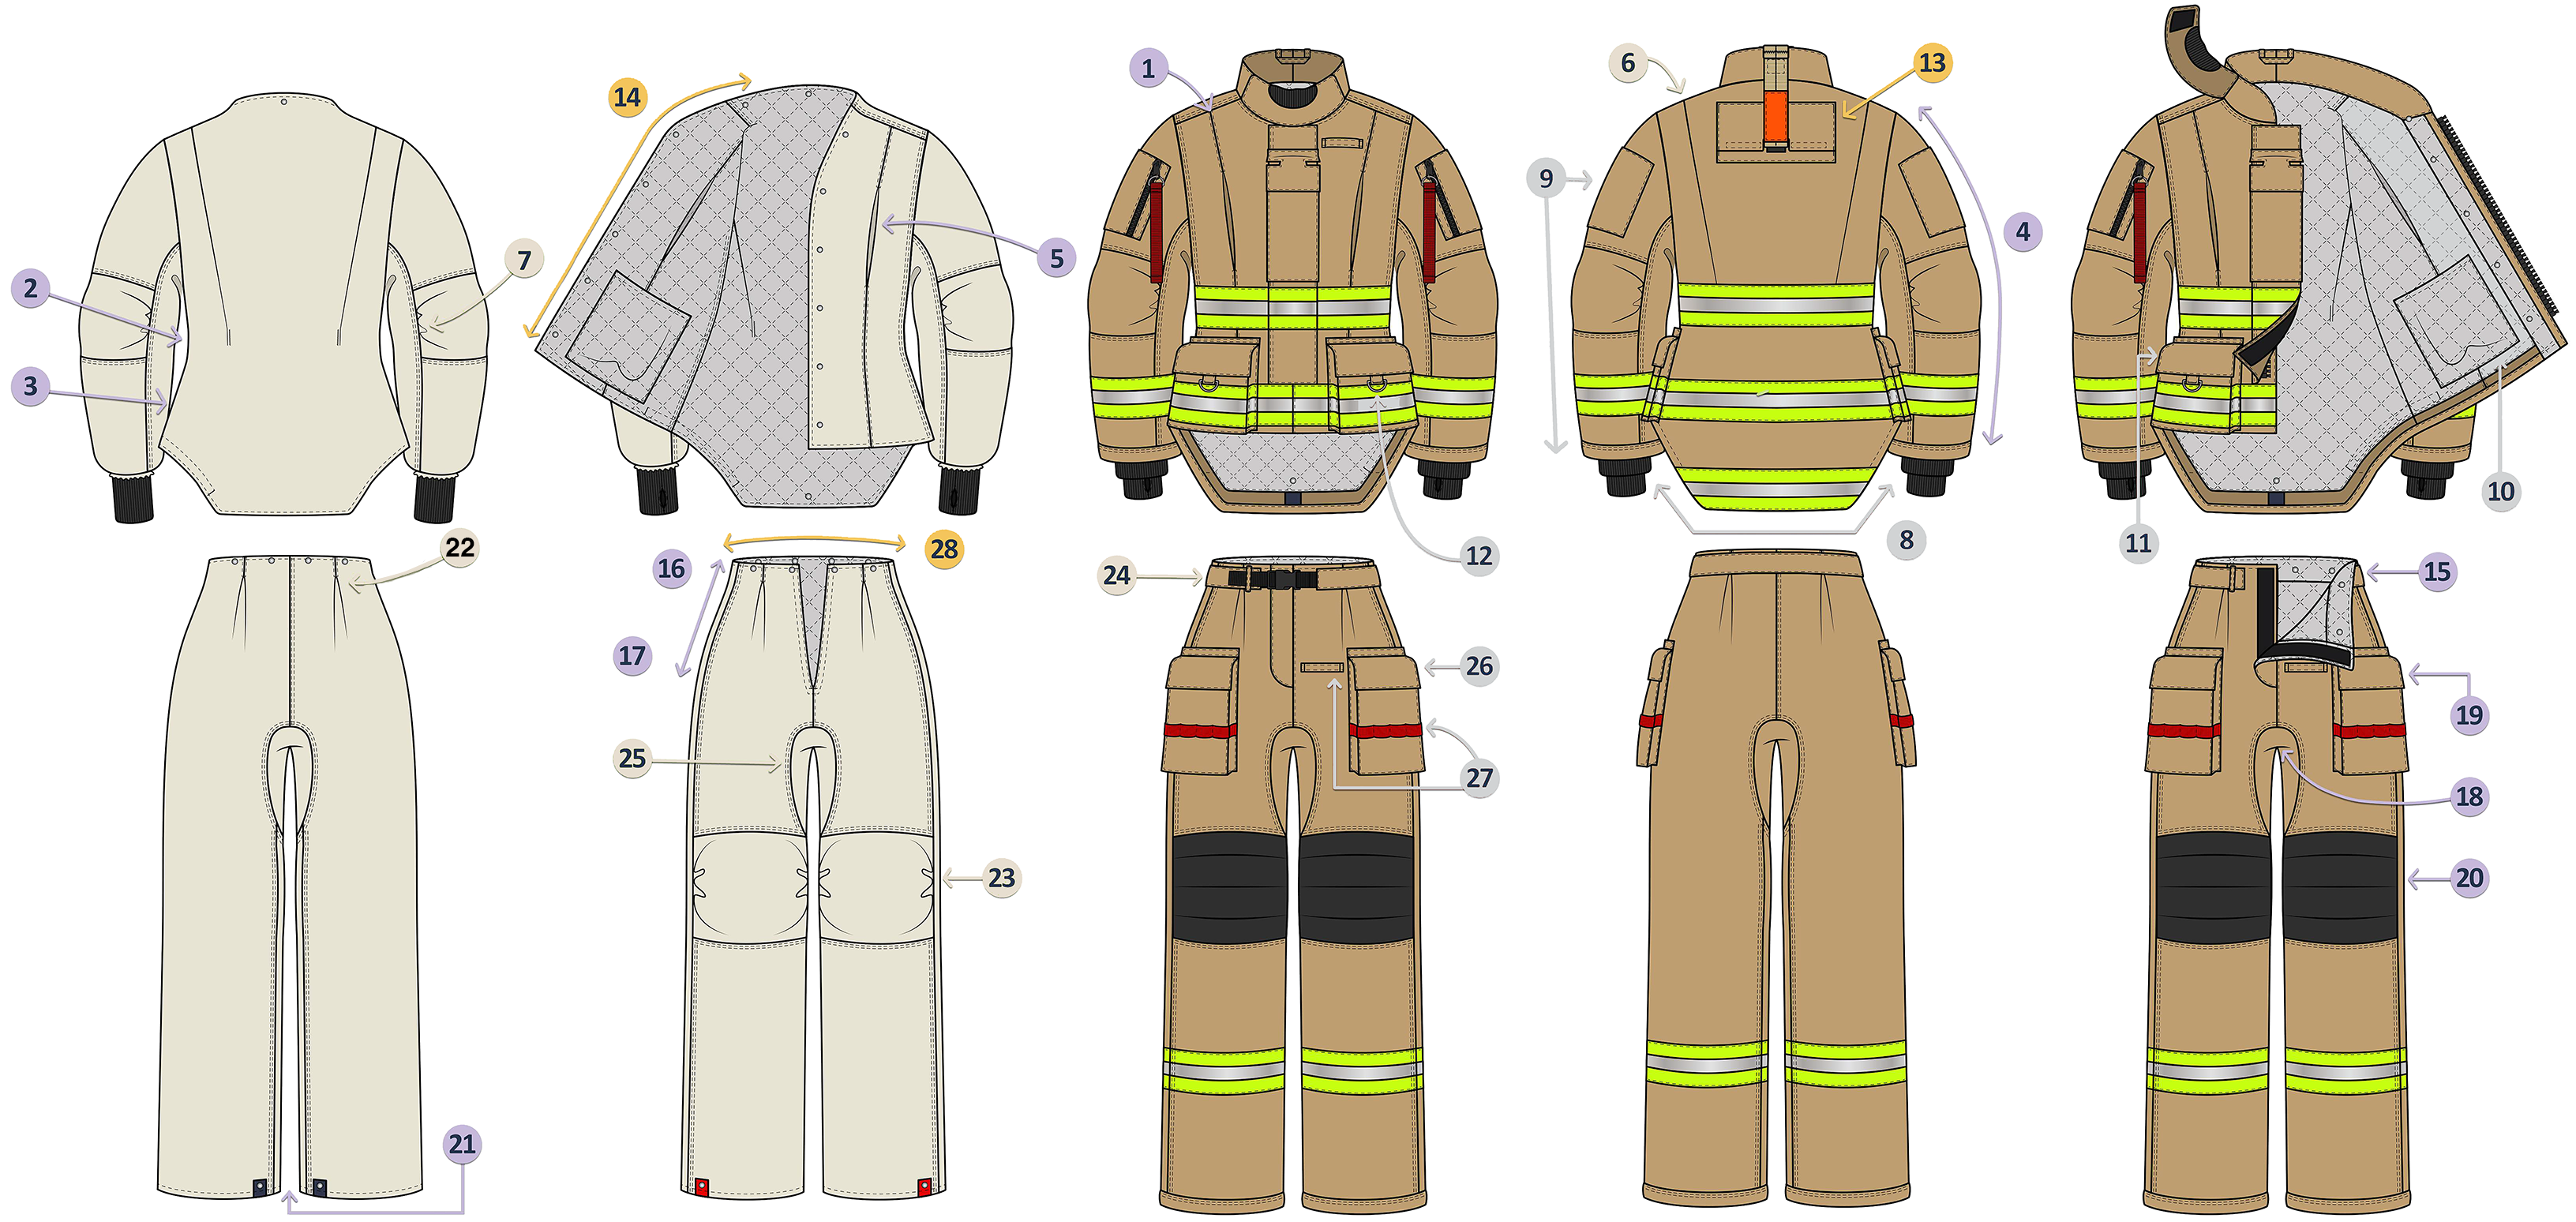 Celeste Graciano developed the digital prototype graphics to show the proposed changes in the garment features for the turnout coat, pants and lining. (Graphic credit: Celeste Graciano)